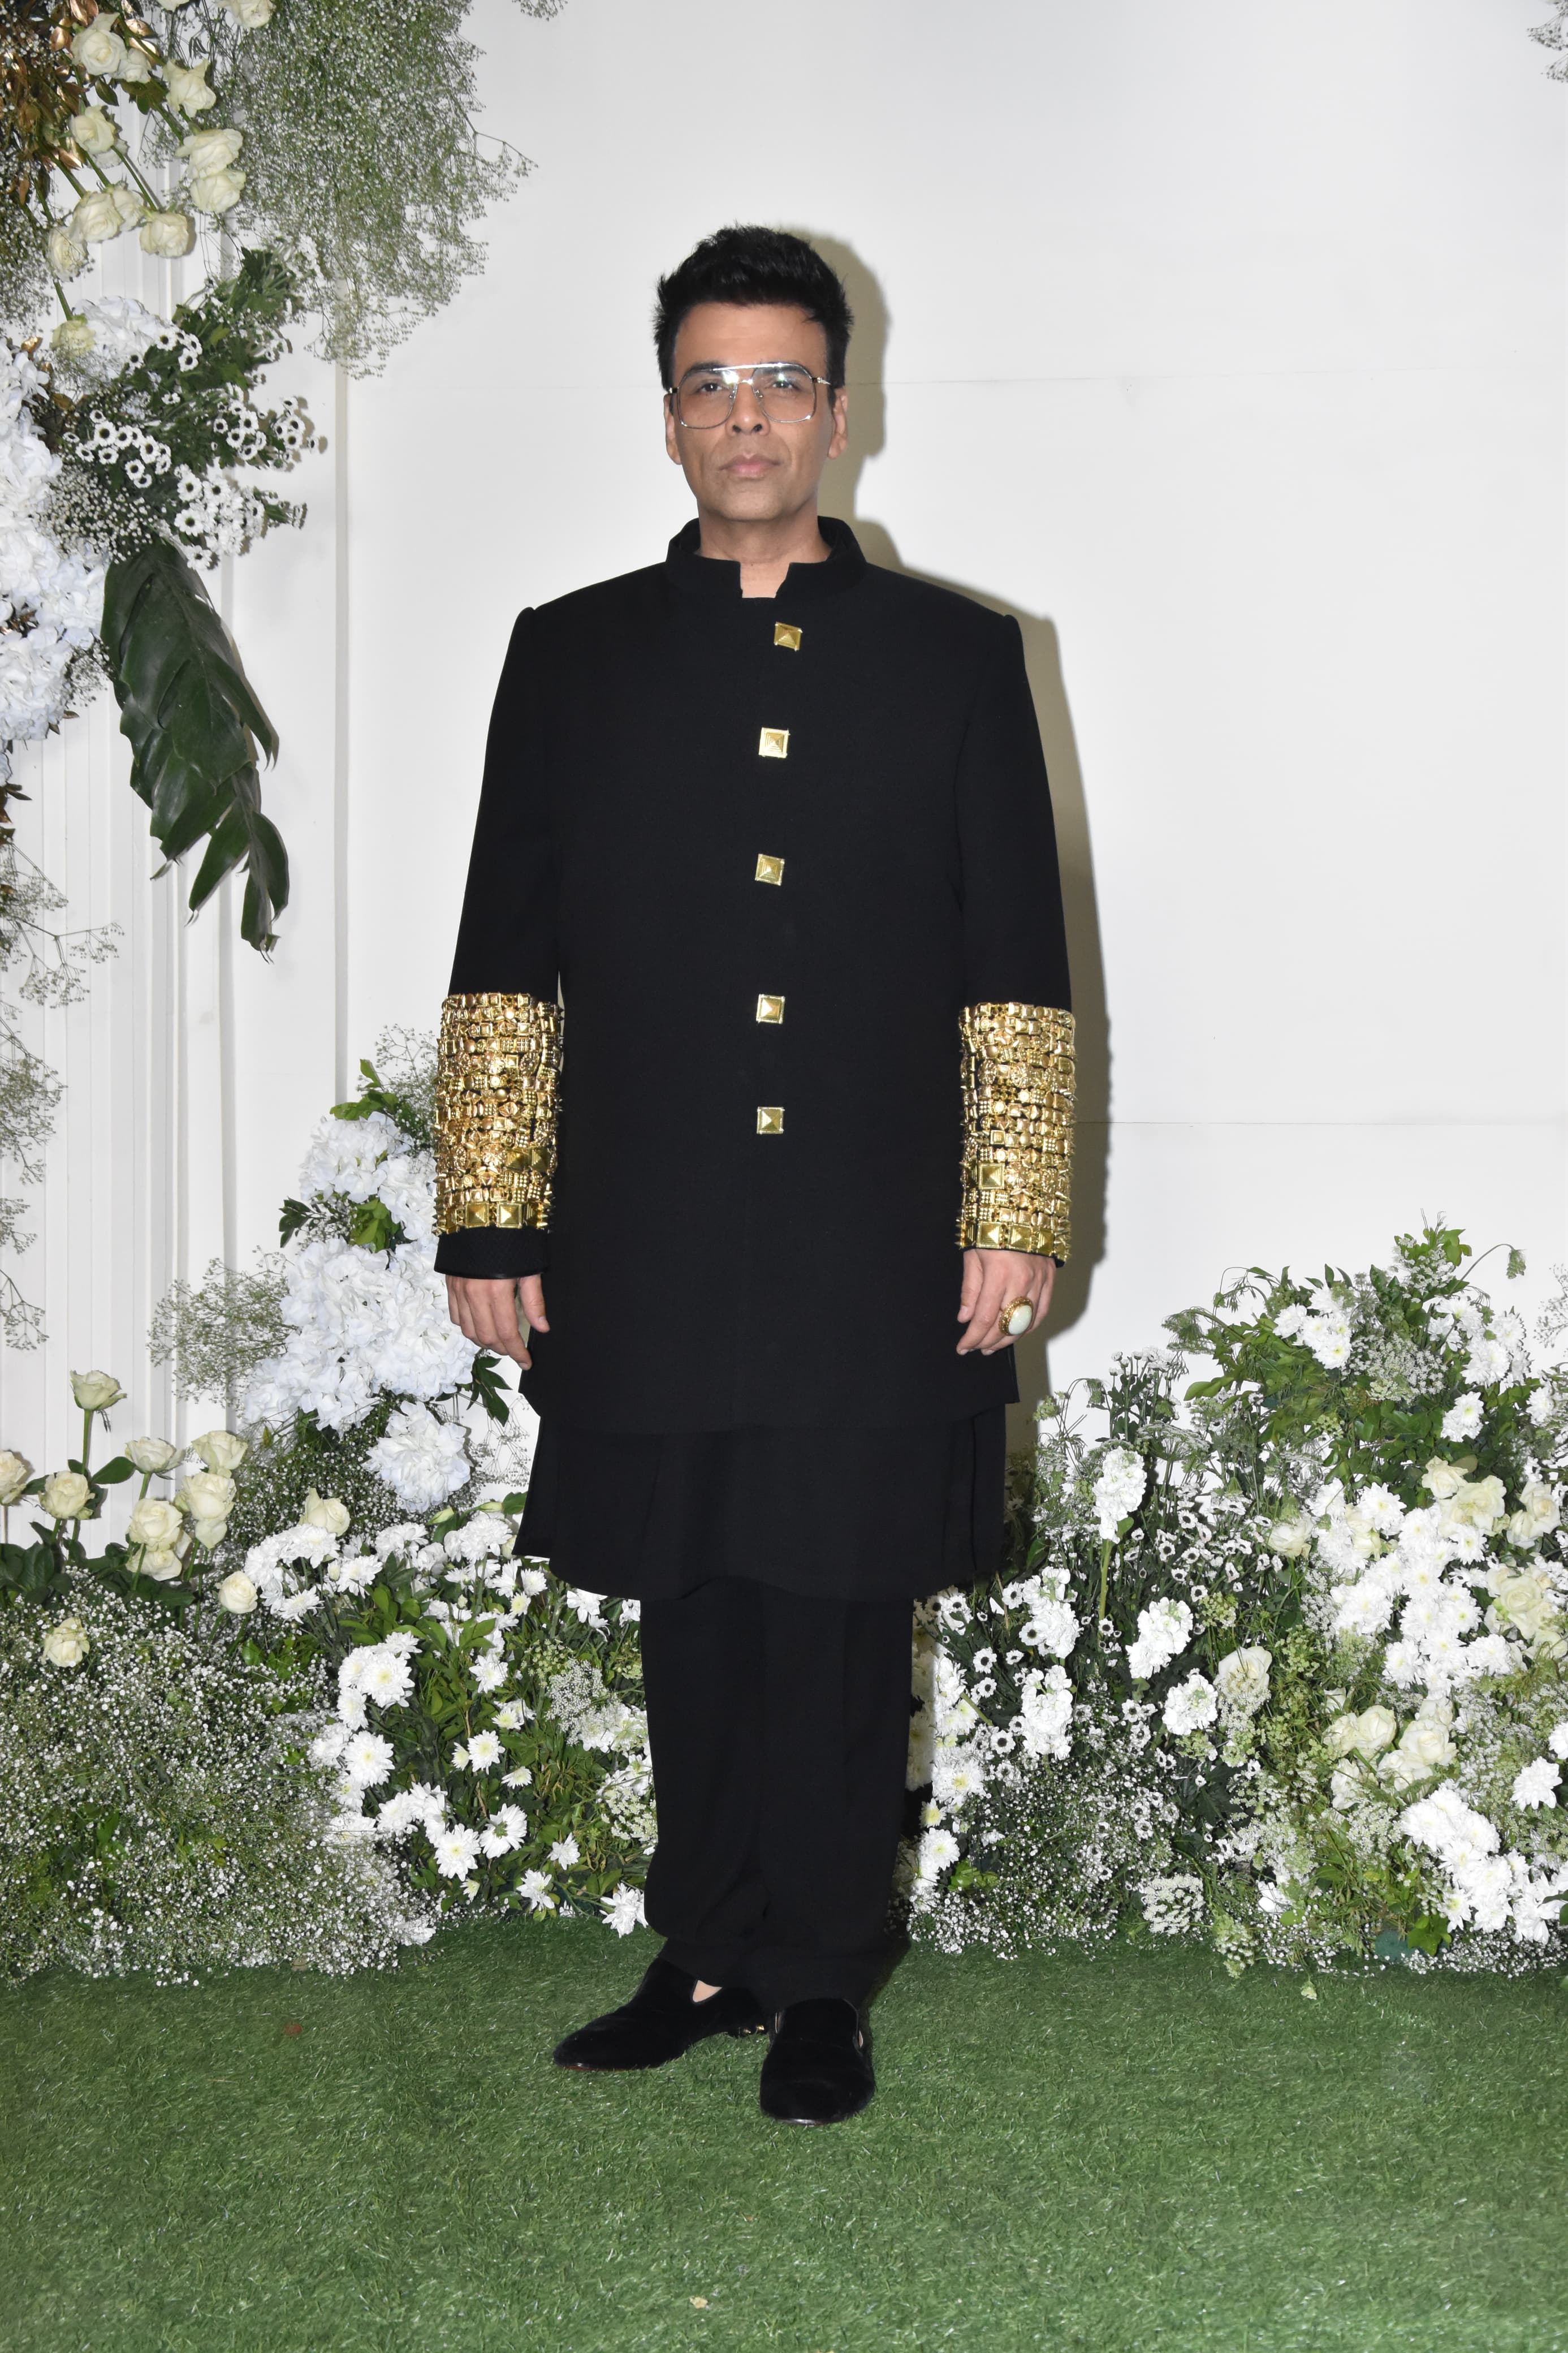 Ace director Karan Johar attended the party wearing a sherwani suit adorned with intricate golden embroidery on the sleeves